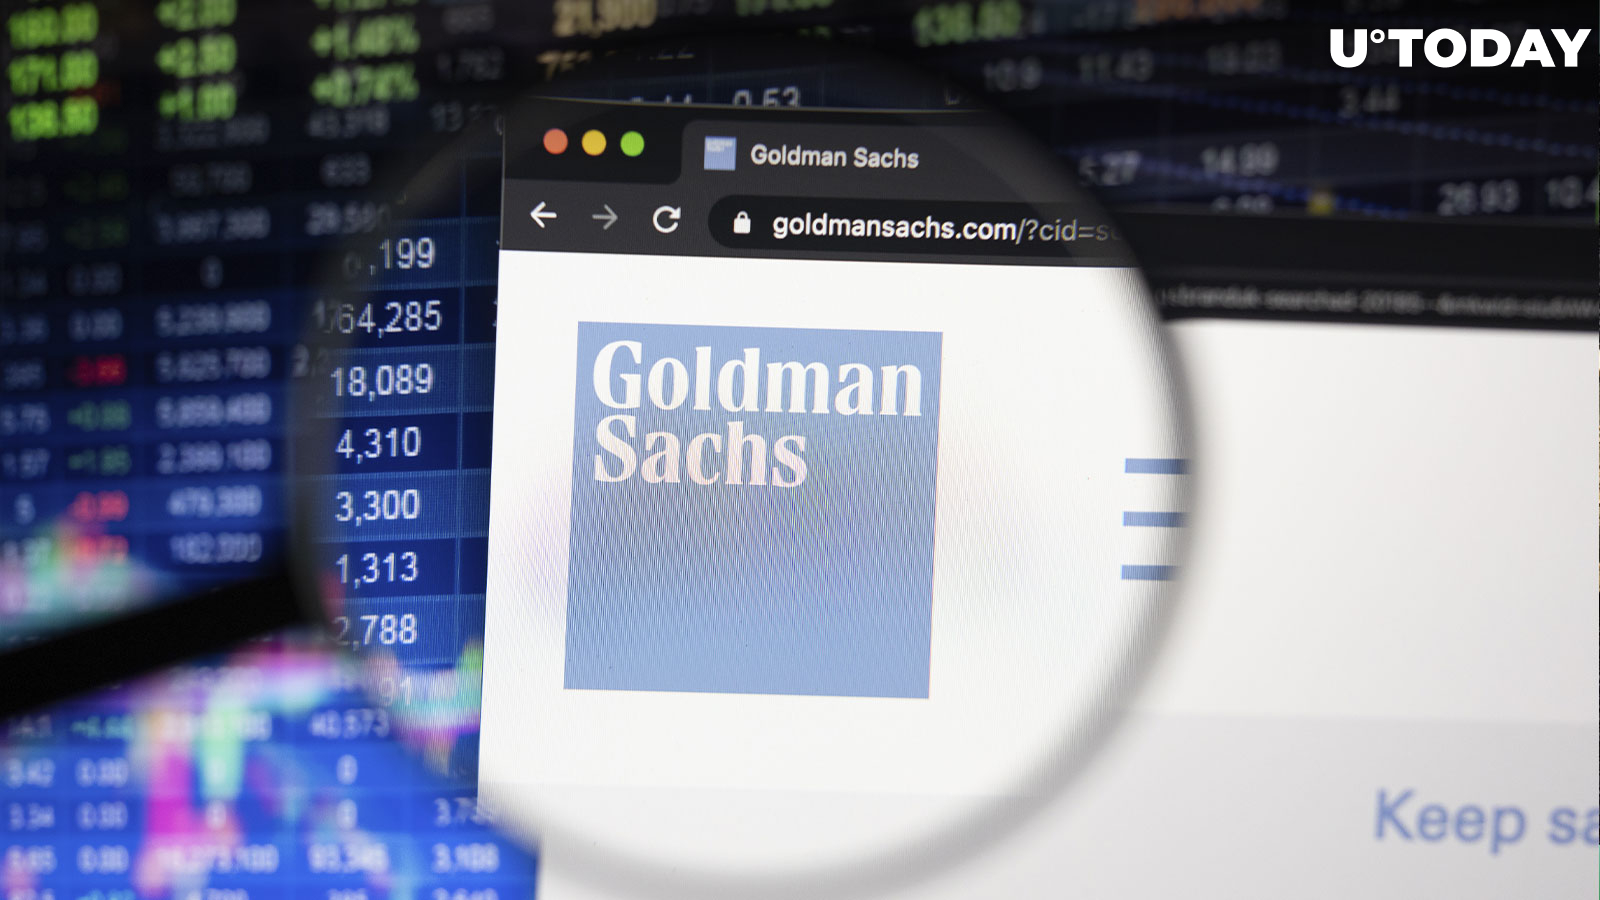 Goldman Sachs Plans to Invest Tens of Millions of Dollars in Crypto Companies